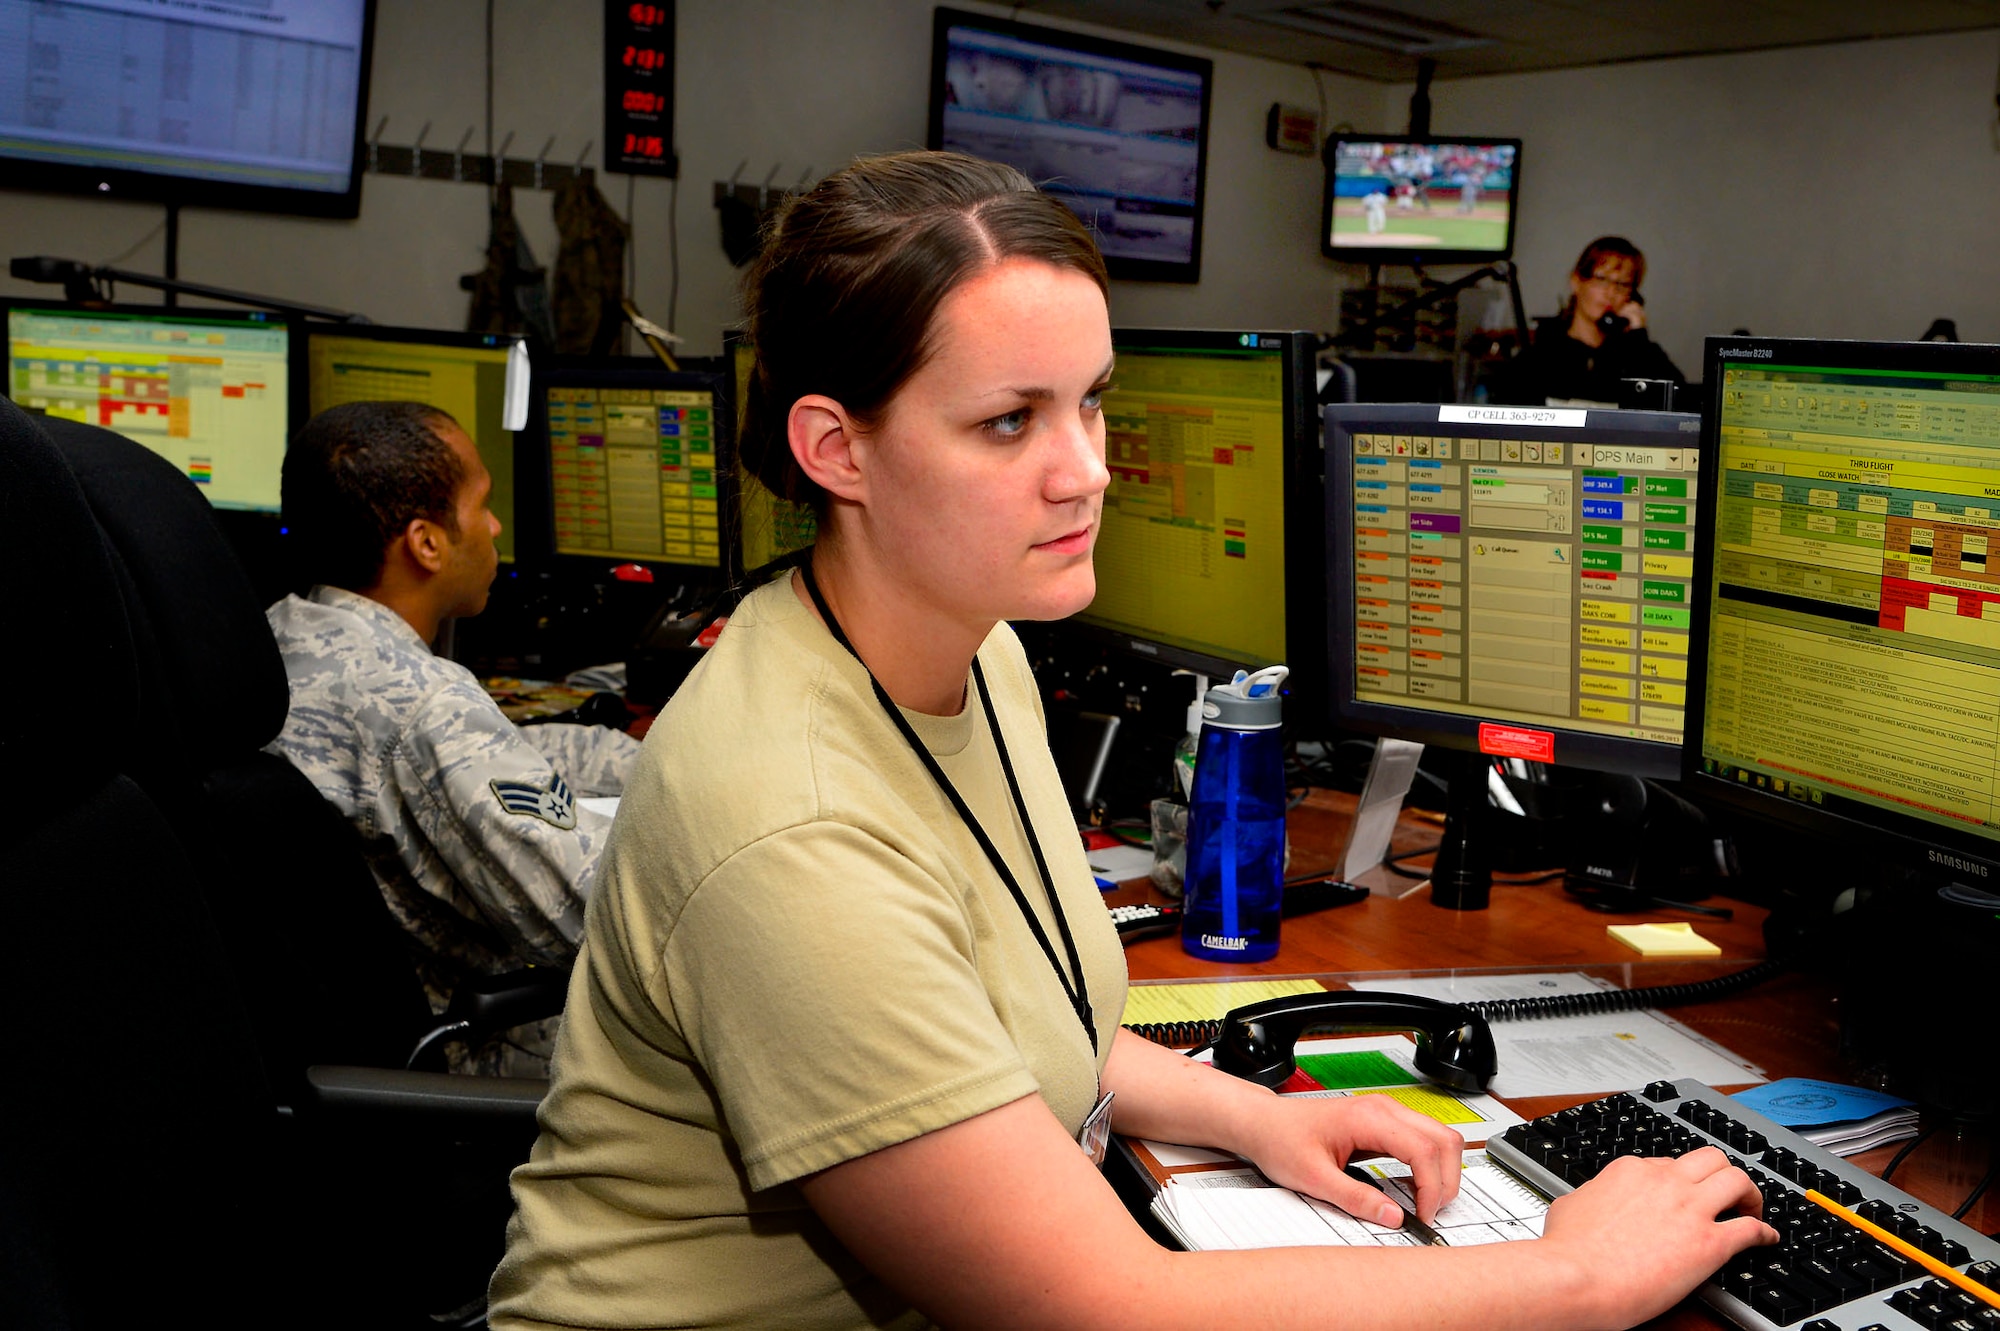 Airman Maura Tunney, 436 Airlift Wing command post emergency action controller, coordinates cargo with the Air Terminal Operations Center May 15, 2013, at the command post on Dover AFB, Del., to ensure an on time departure. Personnel from the command post, ATOC and Maintenance Operations Control Center work together to keep aircraft and cargo moving. (U.S. Air Force photo/David S. Tucker)